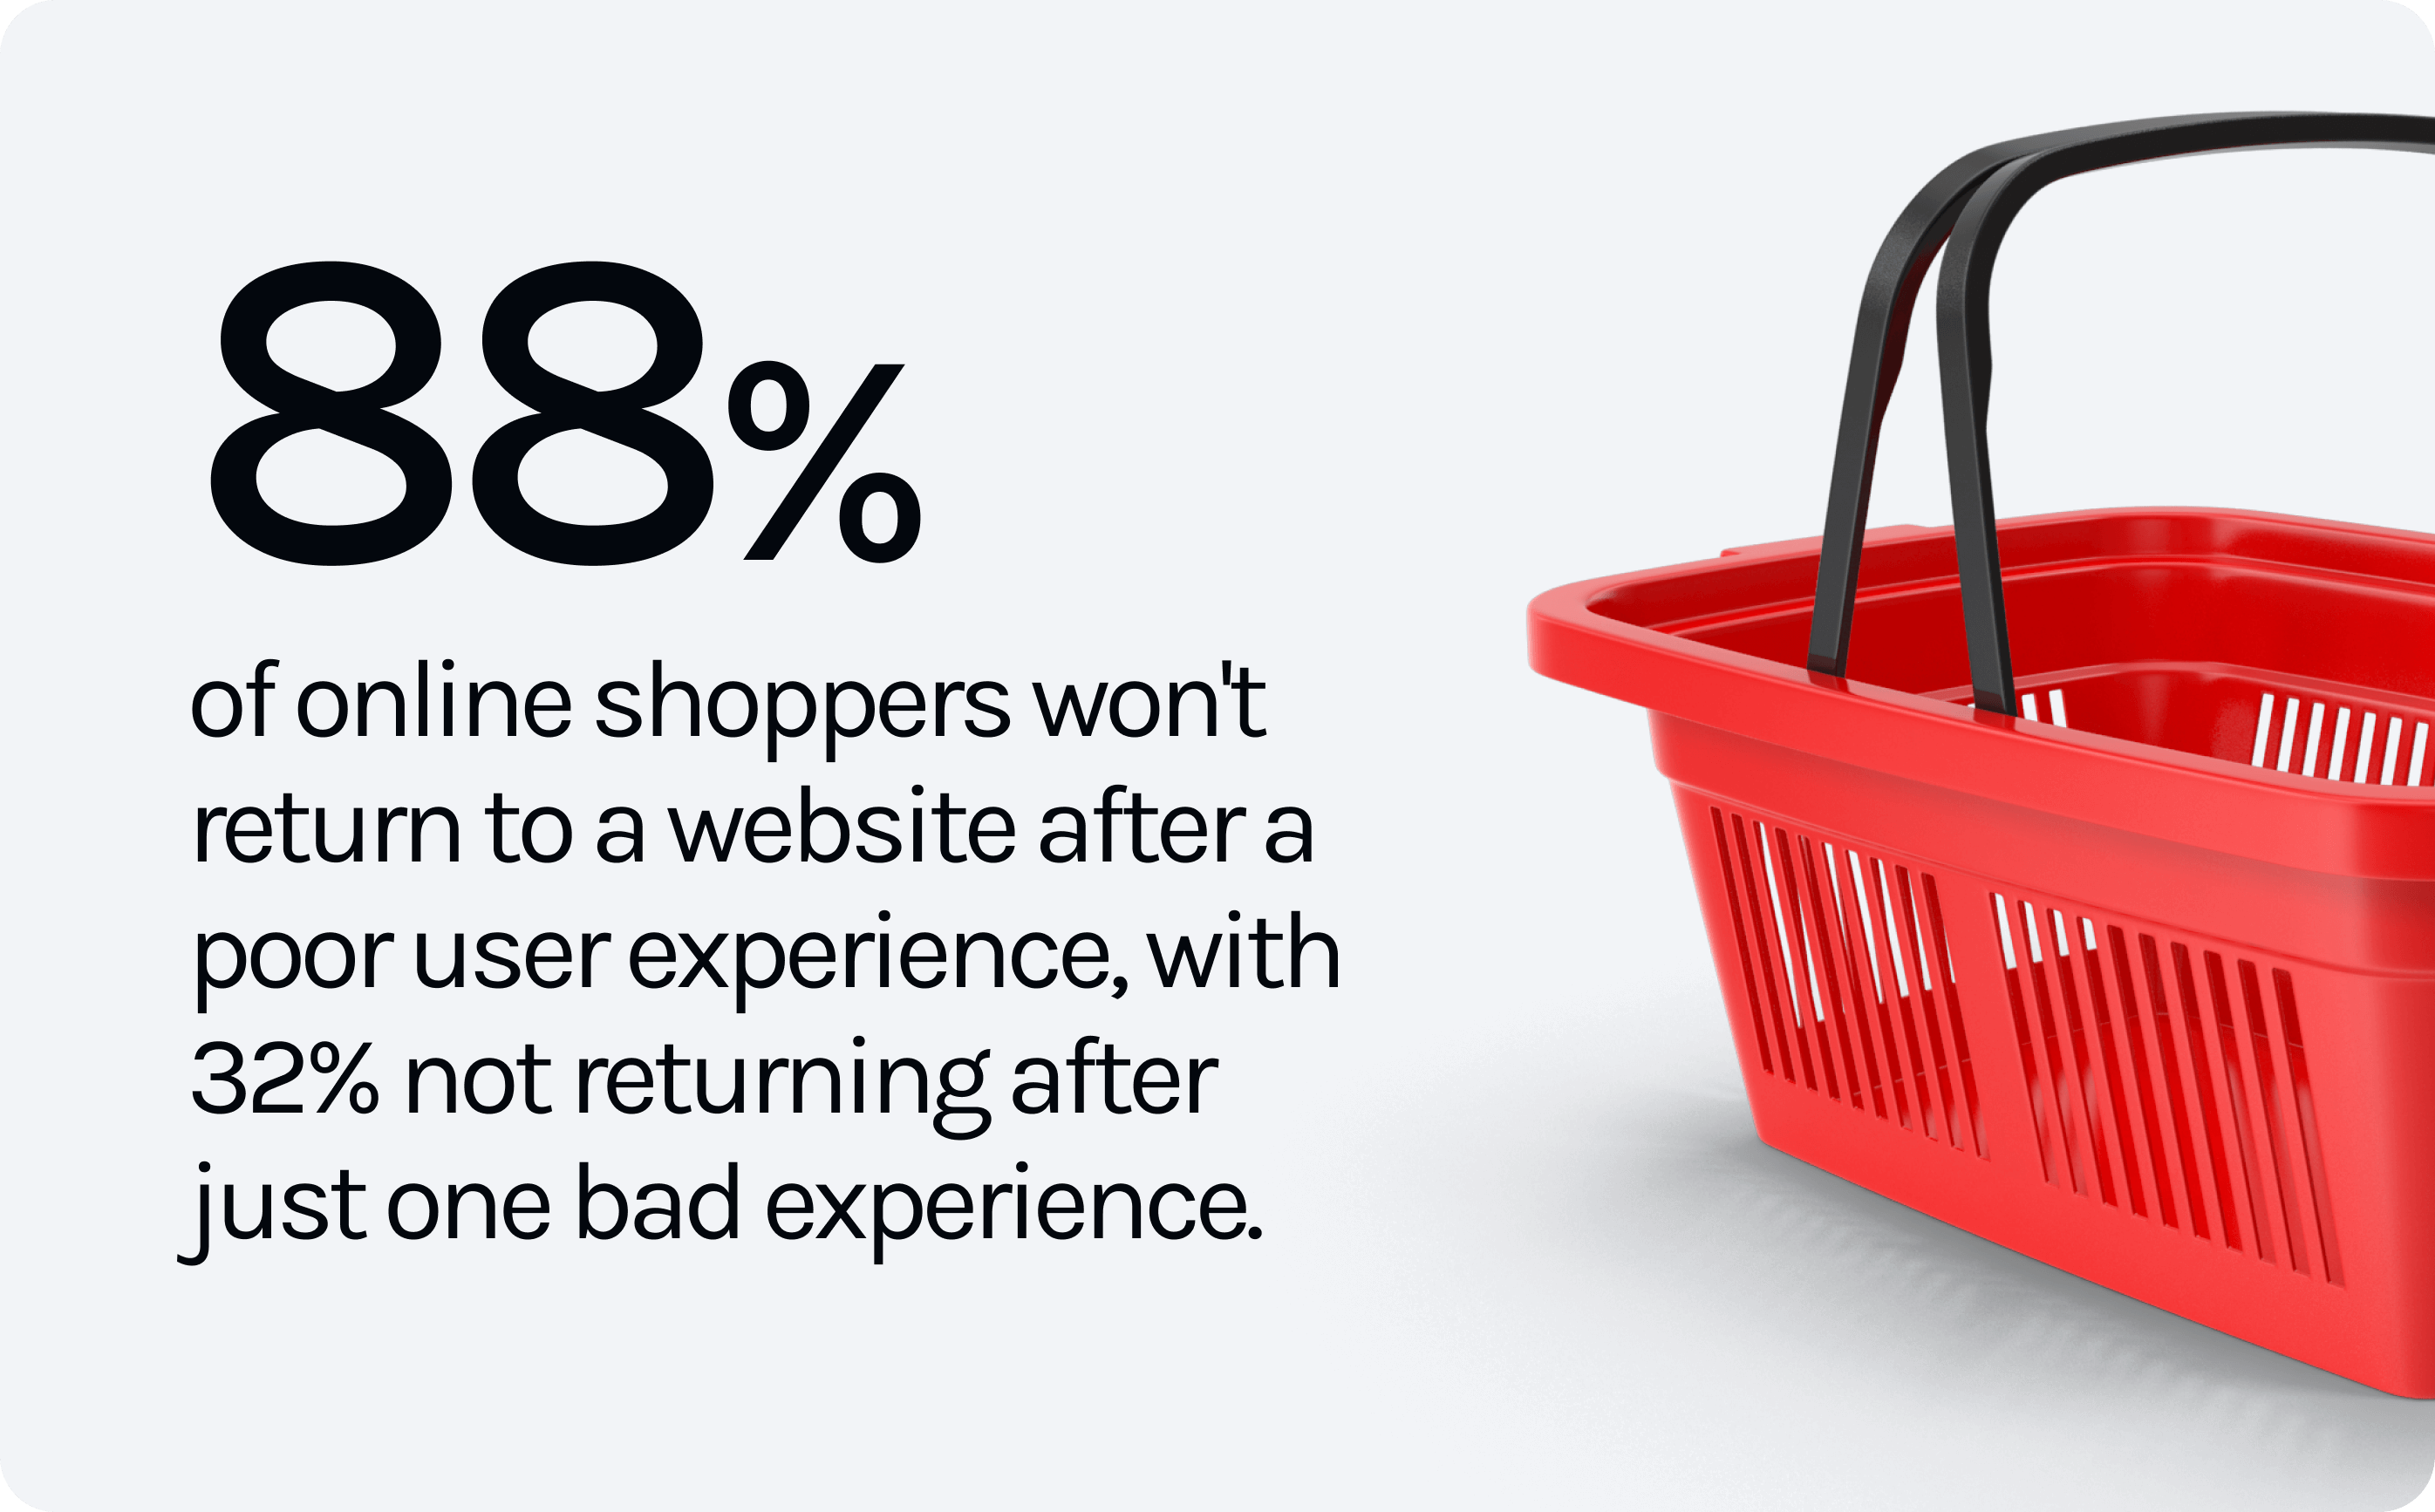 88% of online shoppers won't return to a website after a poor user experience, with 32% not returning after just one bad experience.​